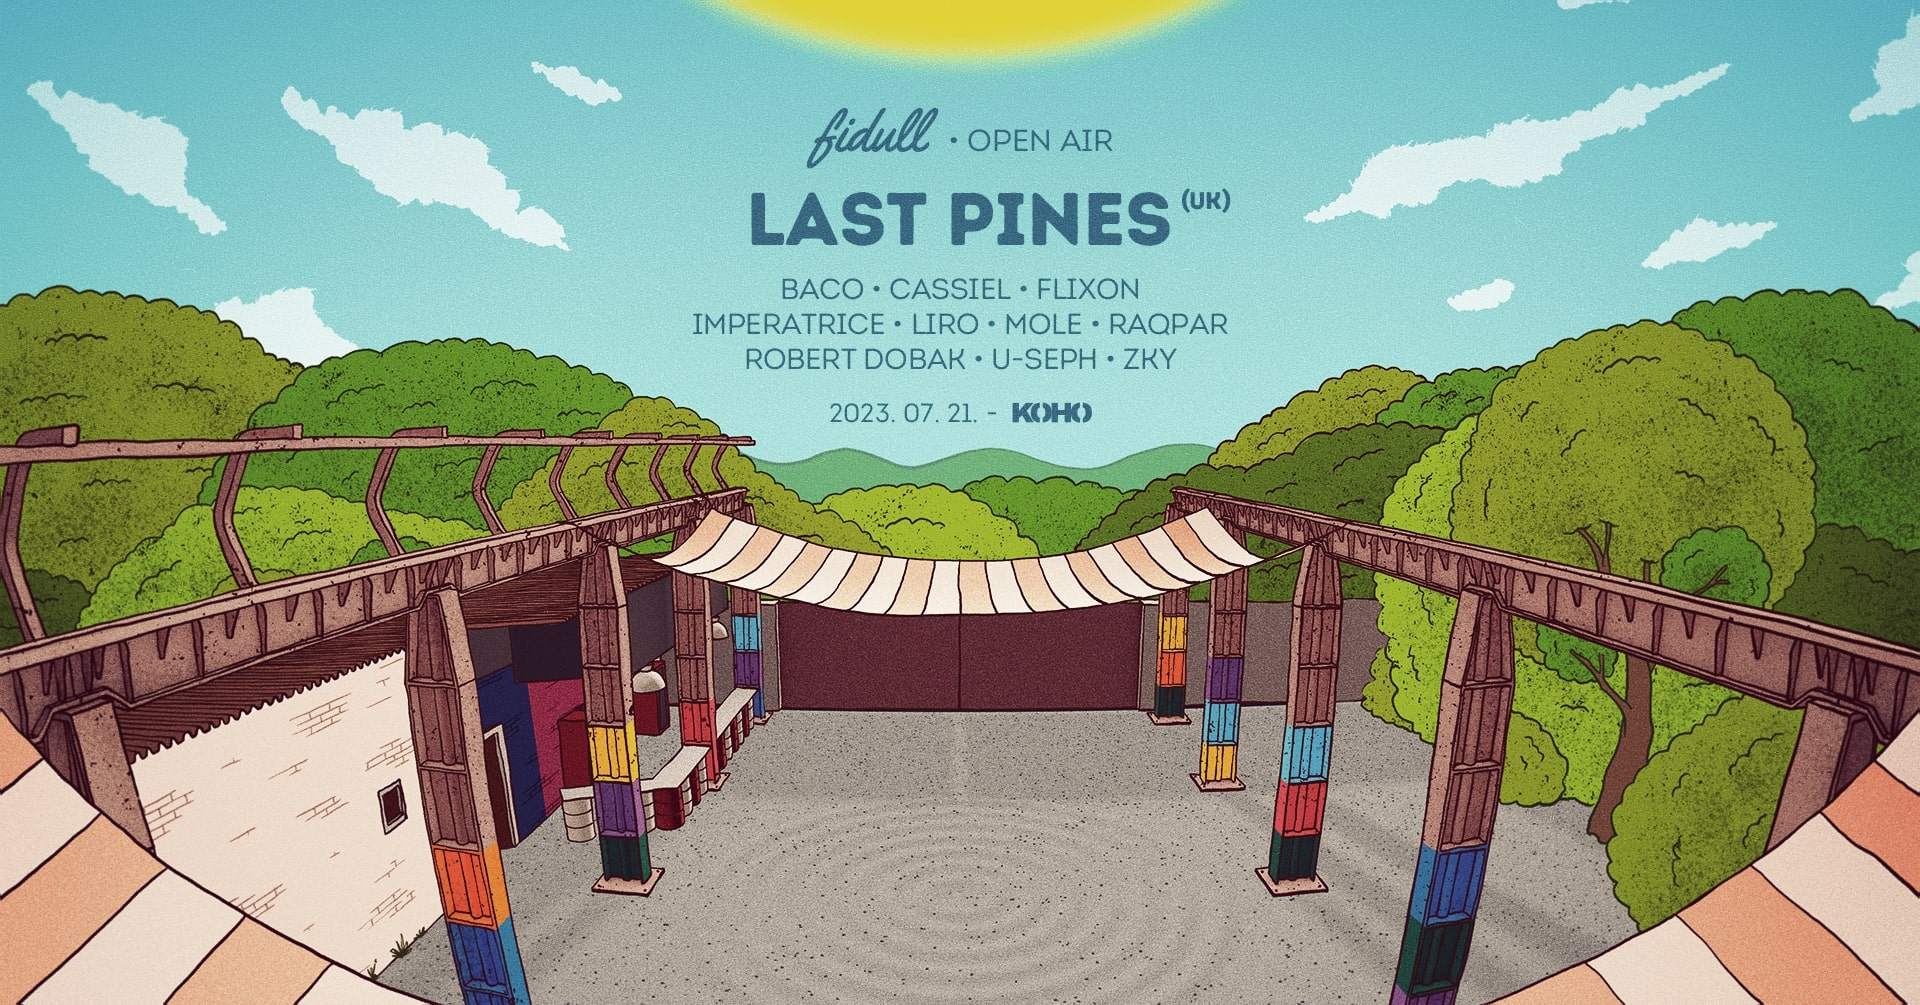 Fidull • Open Air with Last Pines (UK) at KOHO - Página frontal